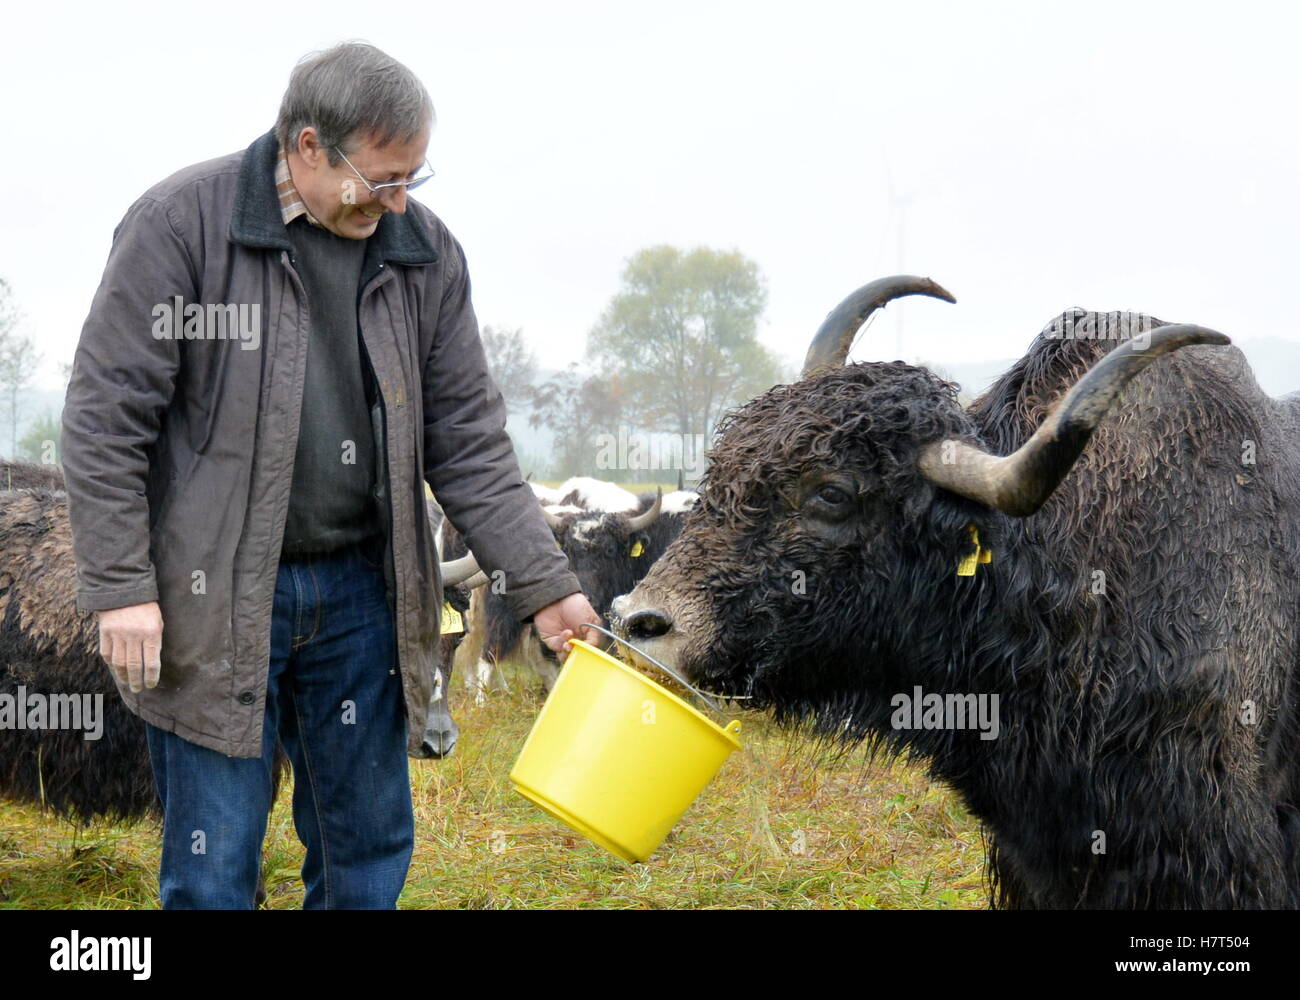 Organic farmer and Yak breeder Hans Rueffer feeds his Yak "Nano" on a pitch near Schluechtern, Germany, 25 October 2016. Rueffer has specialized in selling Asian Highland cattle. Photo: Jörn Perske/dpa Stock Photo